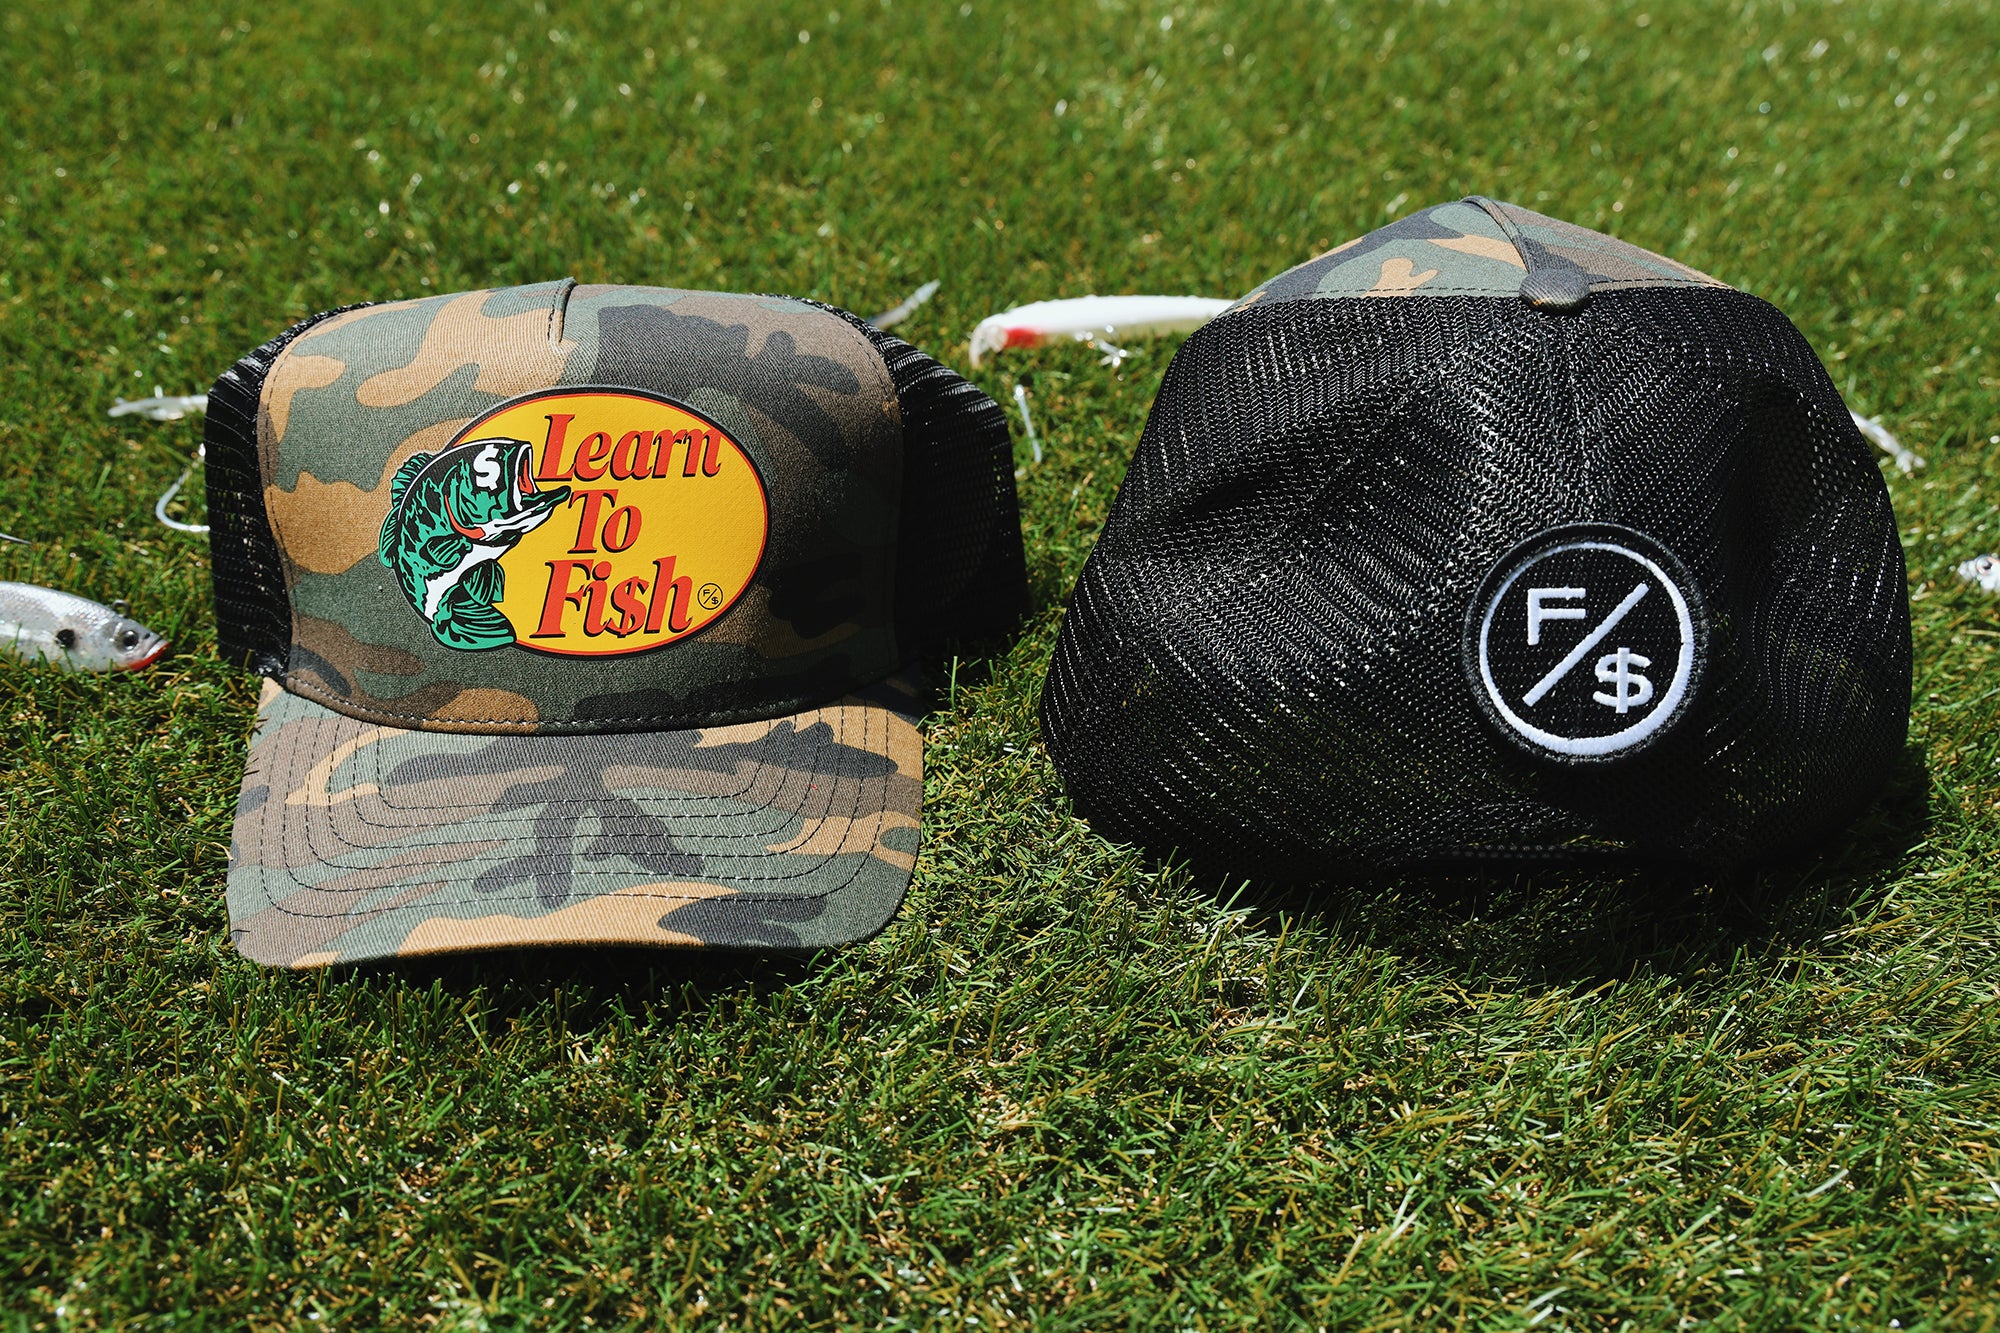 Learn To Fish: Trucker Hat (Camo)